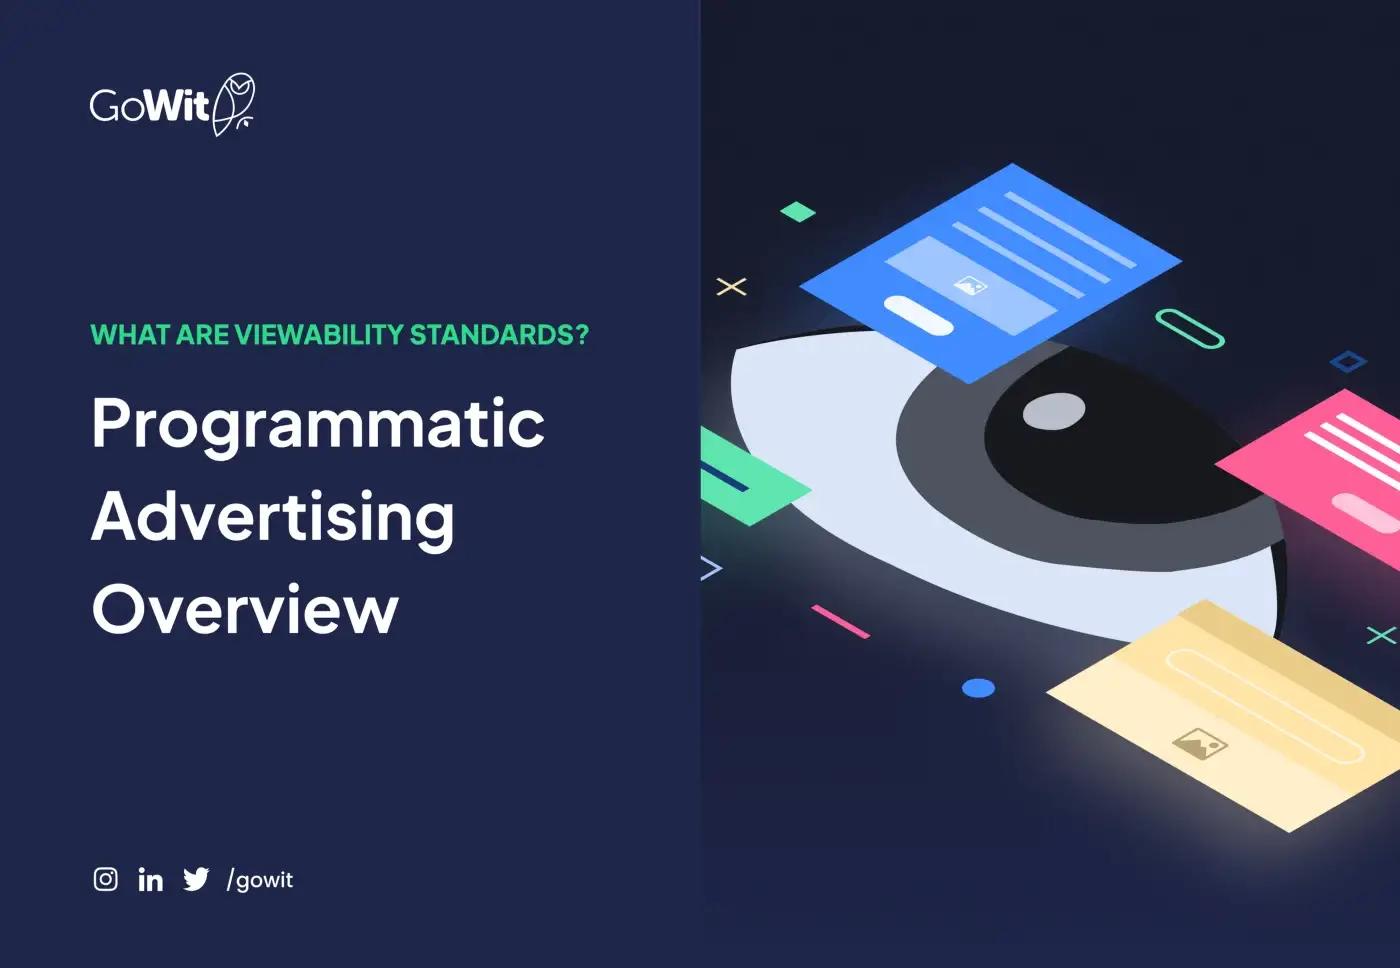 Programmatic Advertising Overview: What are Viewability Standards?